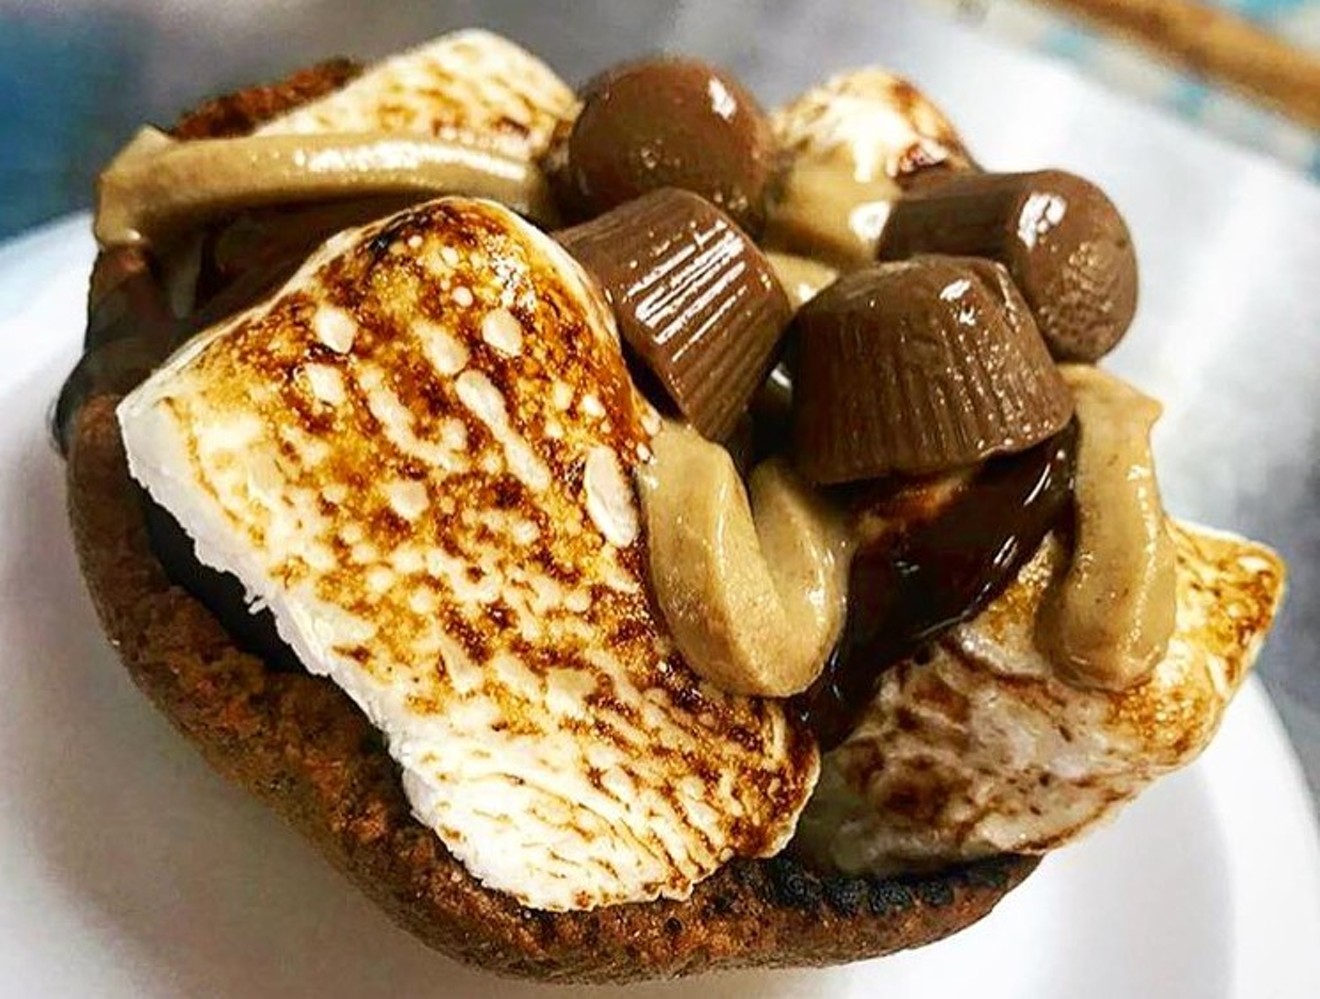 Gourmet s’mores at the Toasted Mallow